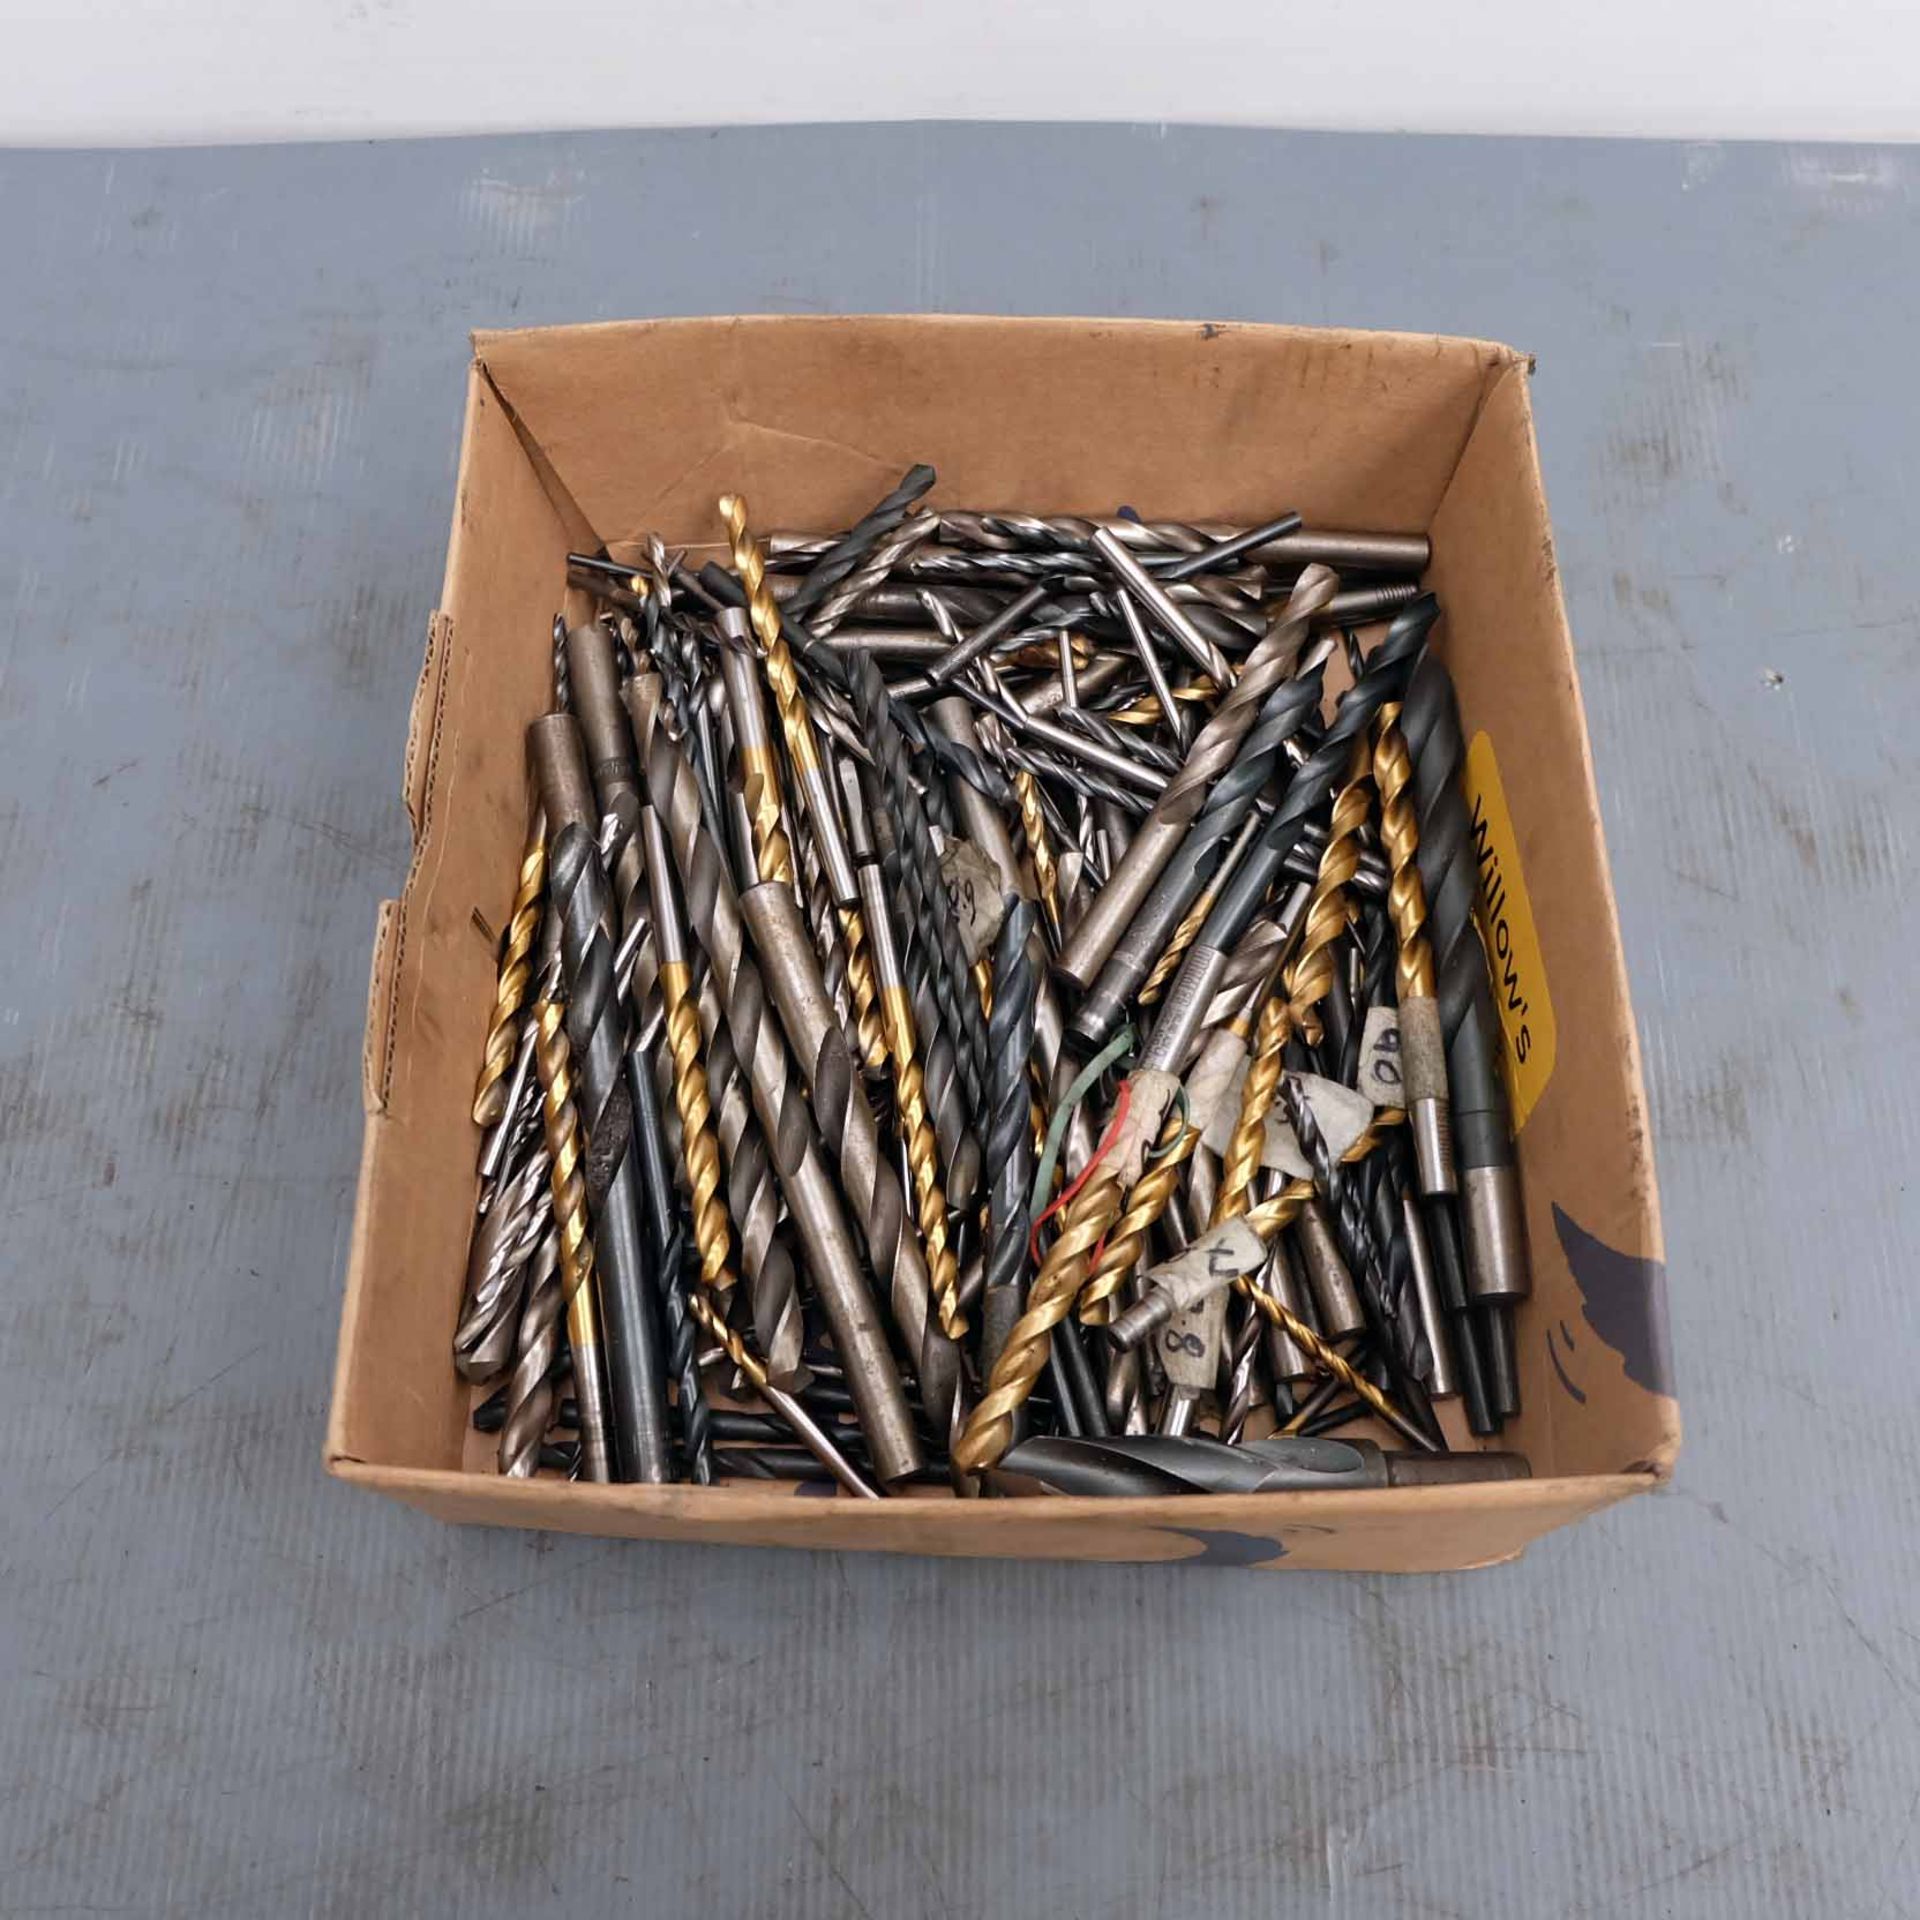 Quantity of Straight Shank Drills. Various Sizes. Metric & Imperial.